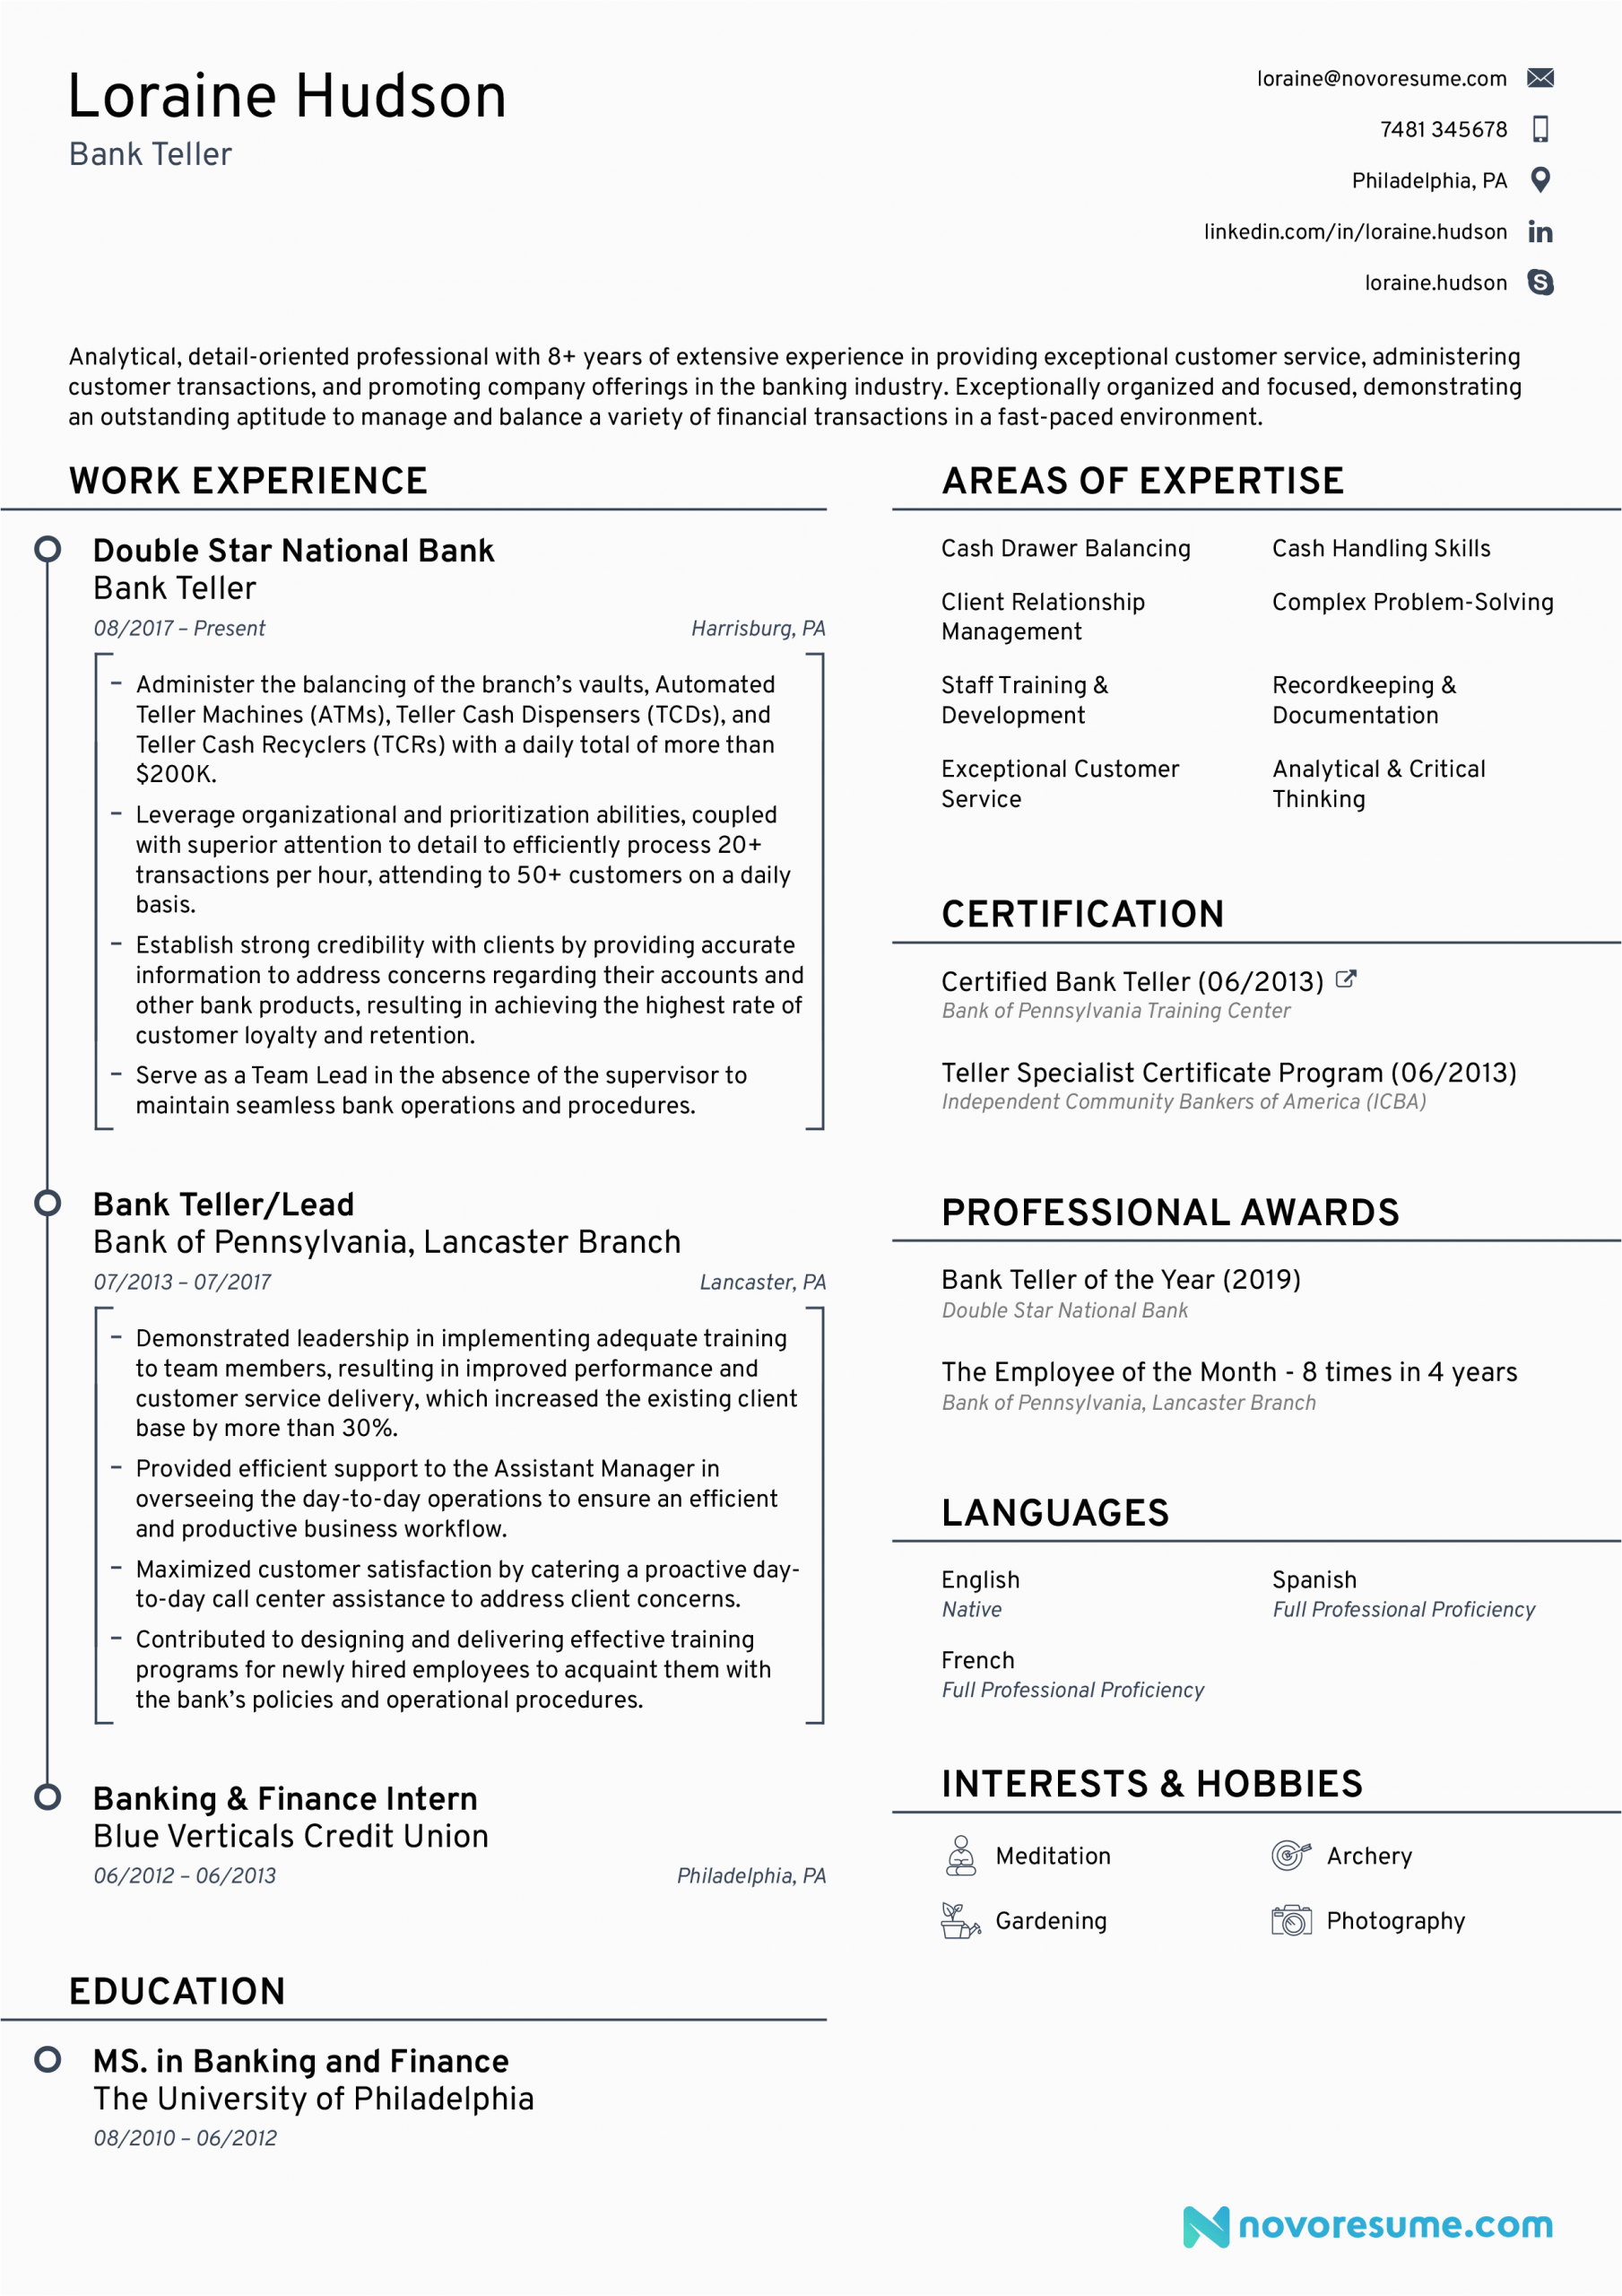 Bank Teller Resume Templates No Experience Bank Teller Resume Examples [updated for 2021]